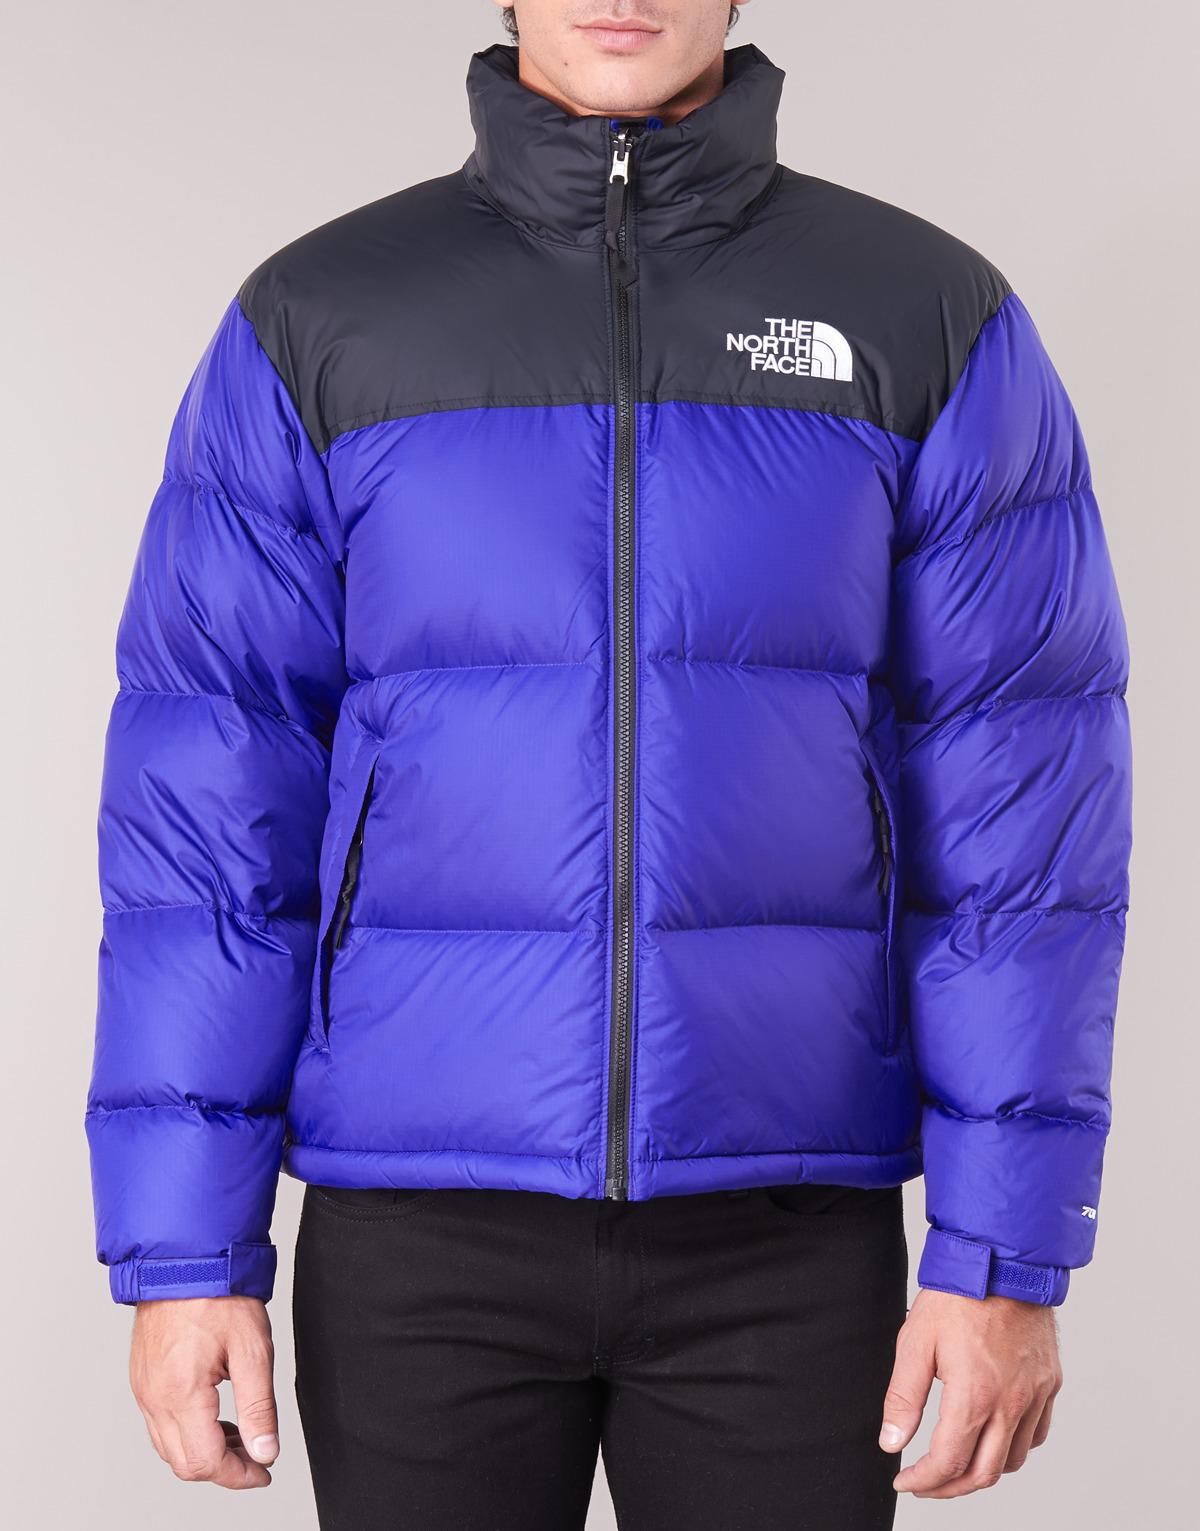 The North Face Nuptse Men's Jacket In Blue for Men - Lyst